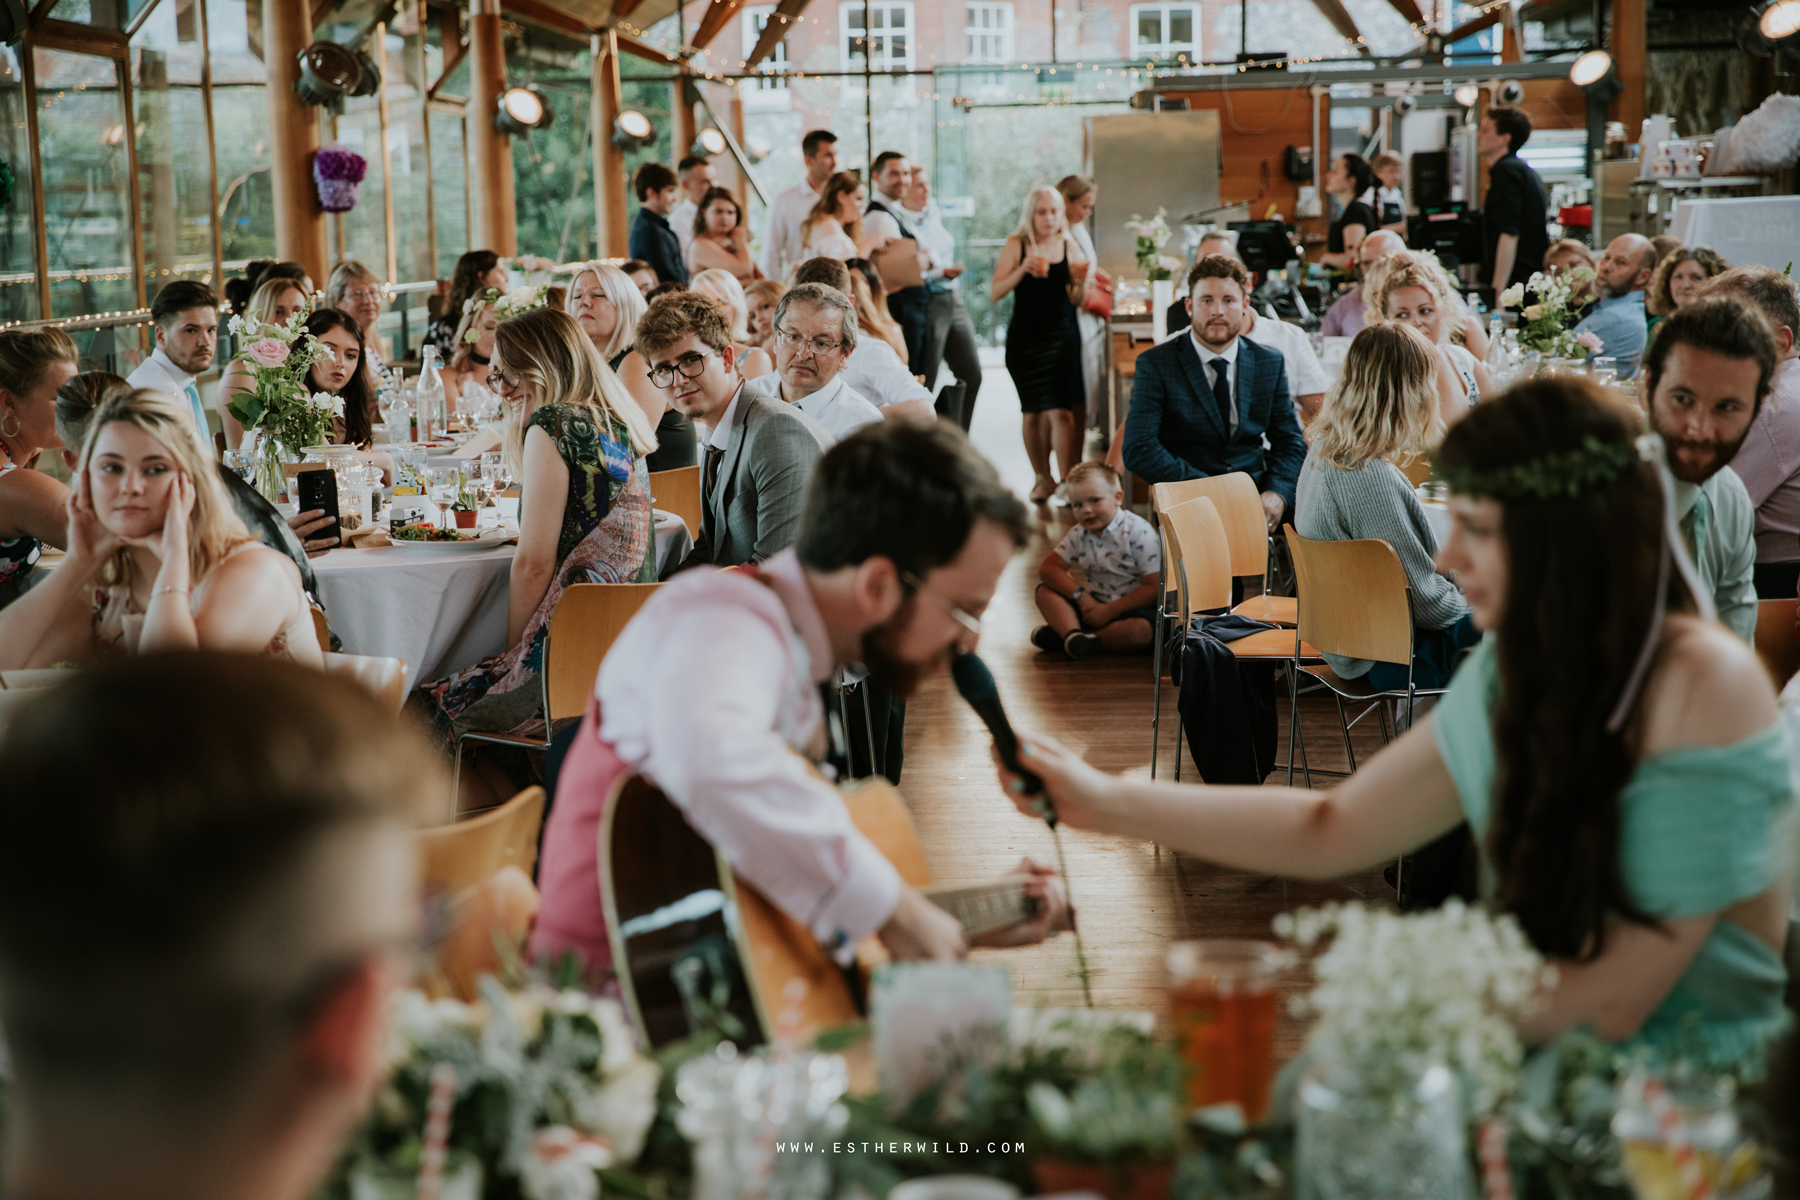 Norwich_Castle_Arcade_Grosvenor_Chip_Birdcage_Cathedral_Cloisters_Refectory_Wedding_Photography_Esther_Wild_Photographer_Norfolk_Kings_Lynn_3R8A2307.jpg